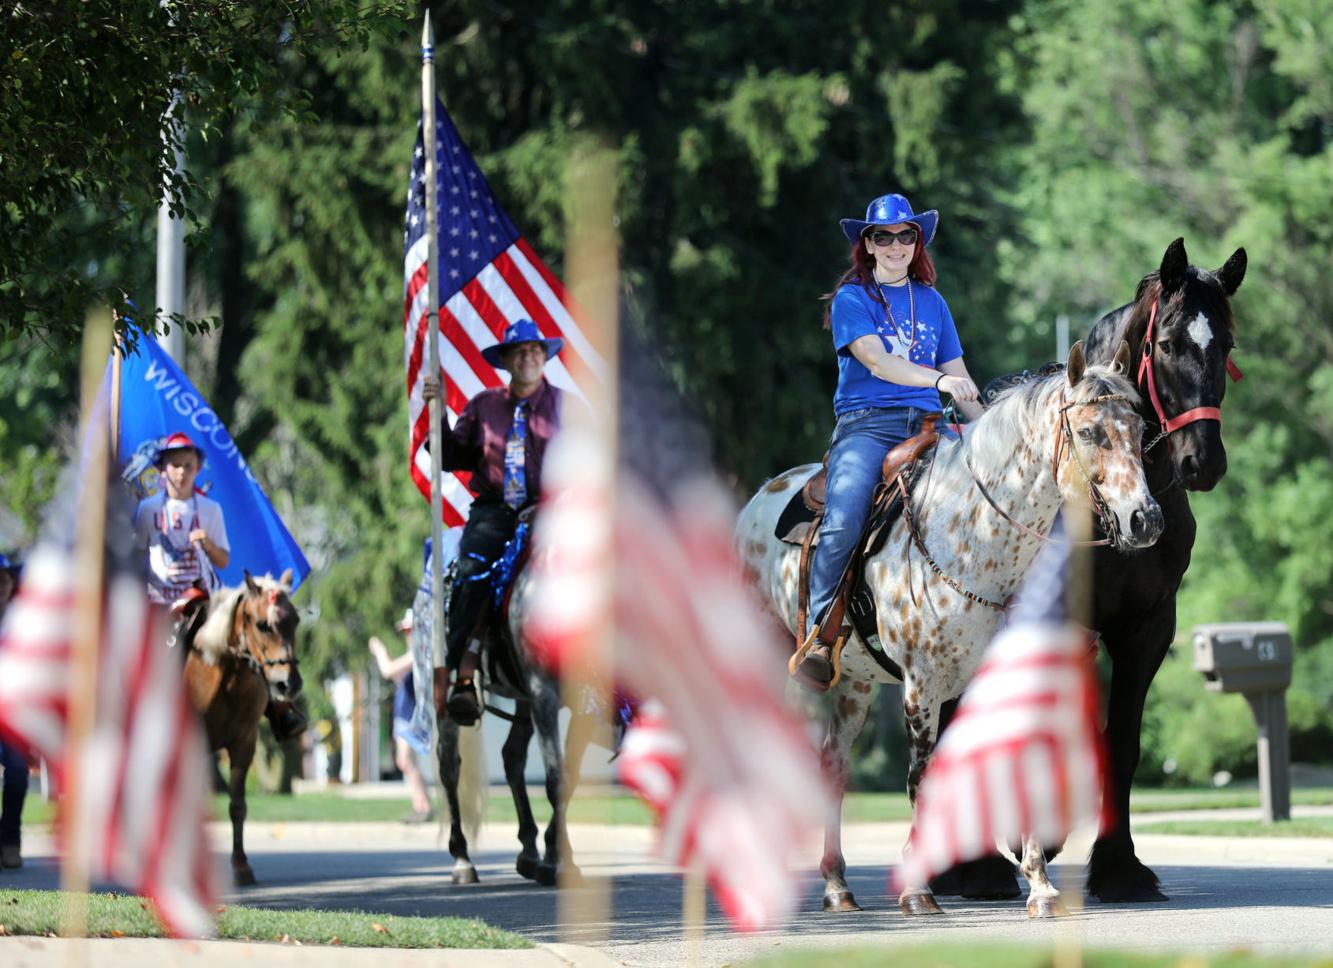 Evansville residents put on grassroots Fourth of July parade Local